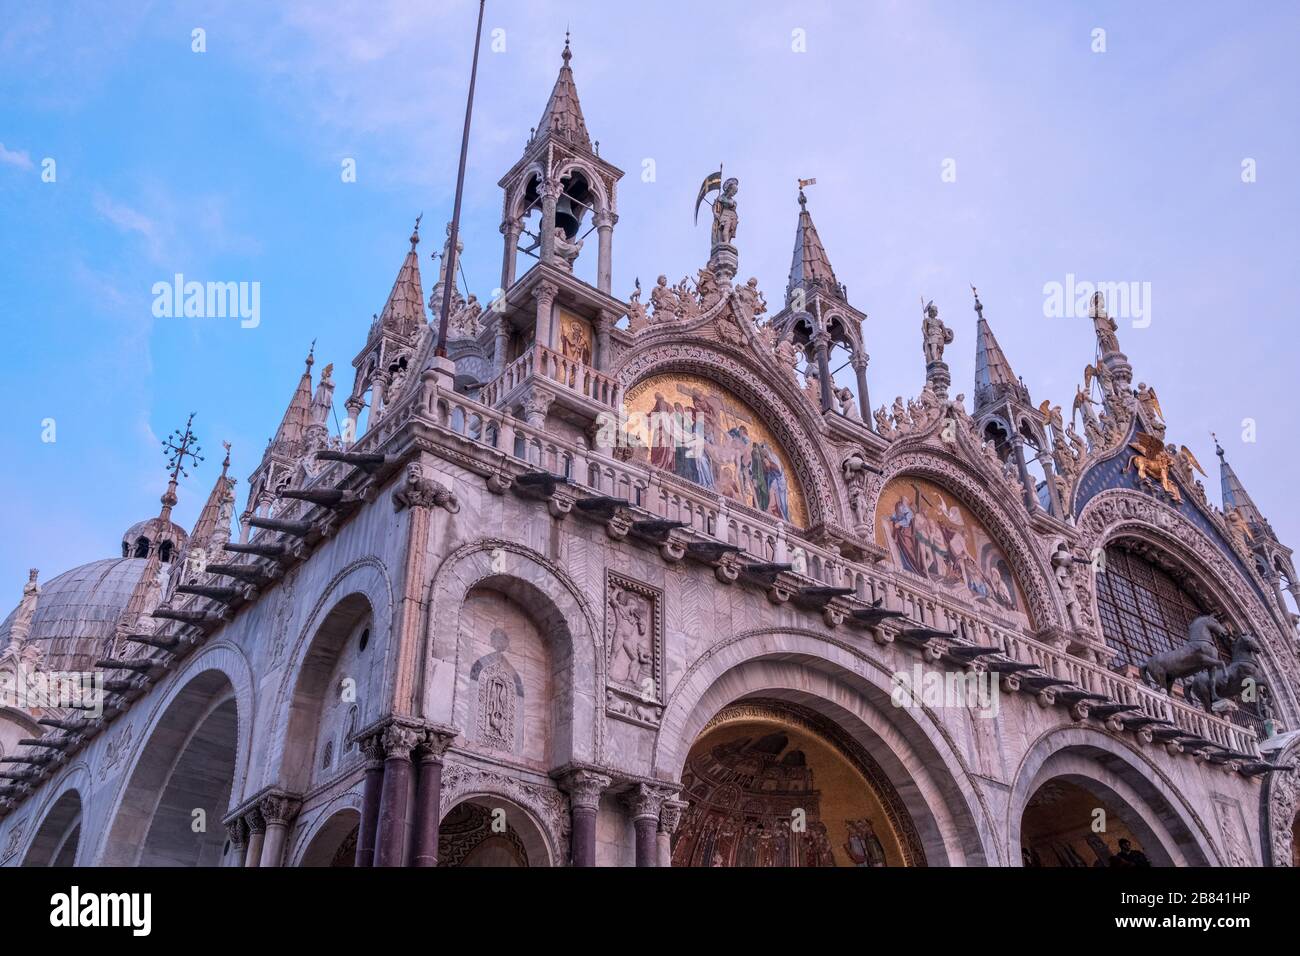 Looking up to northwest corner of ornamented roofline of St Mark's Basilica, Venice. Marble glows pink with light from setting sun. Stock Photo